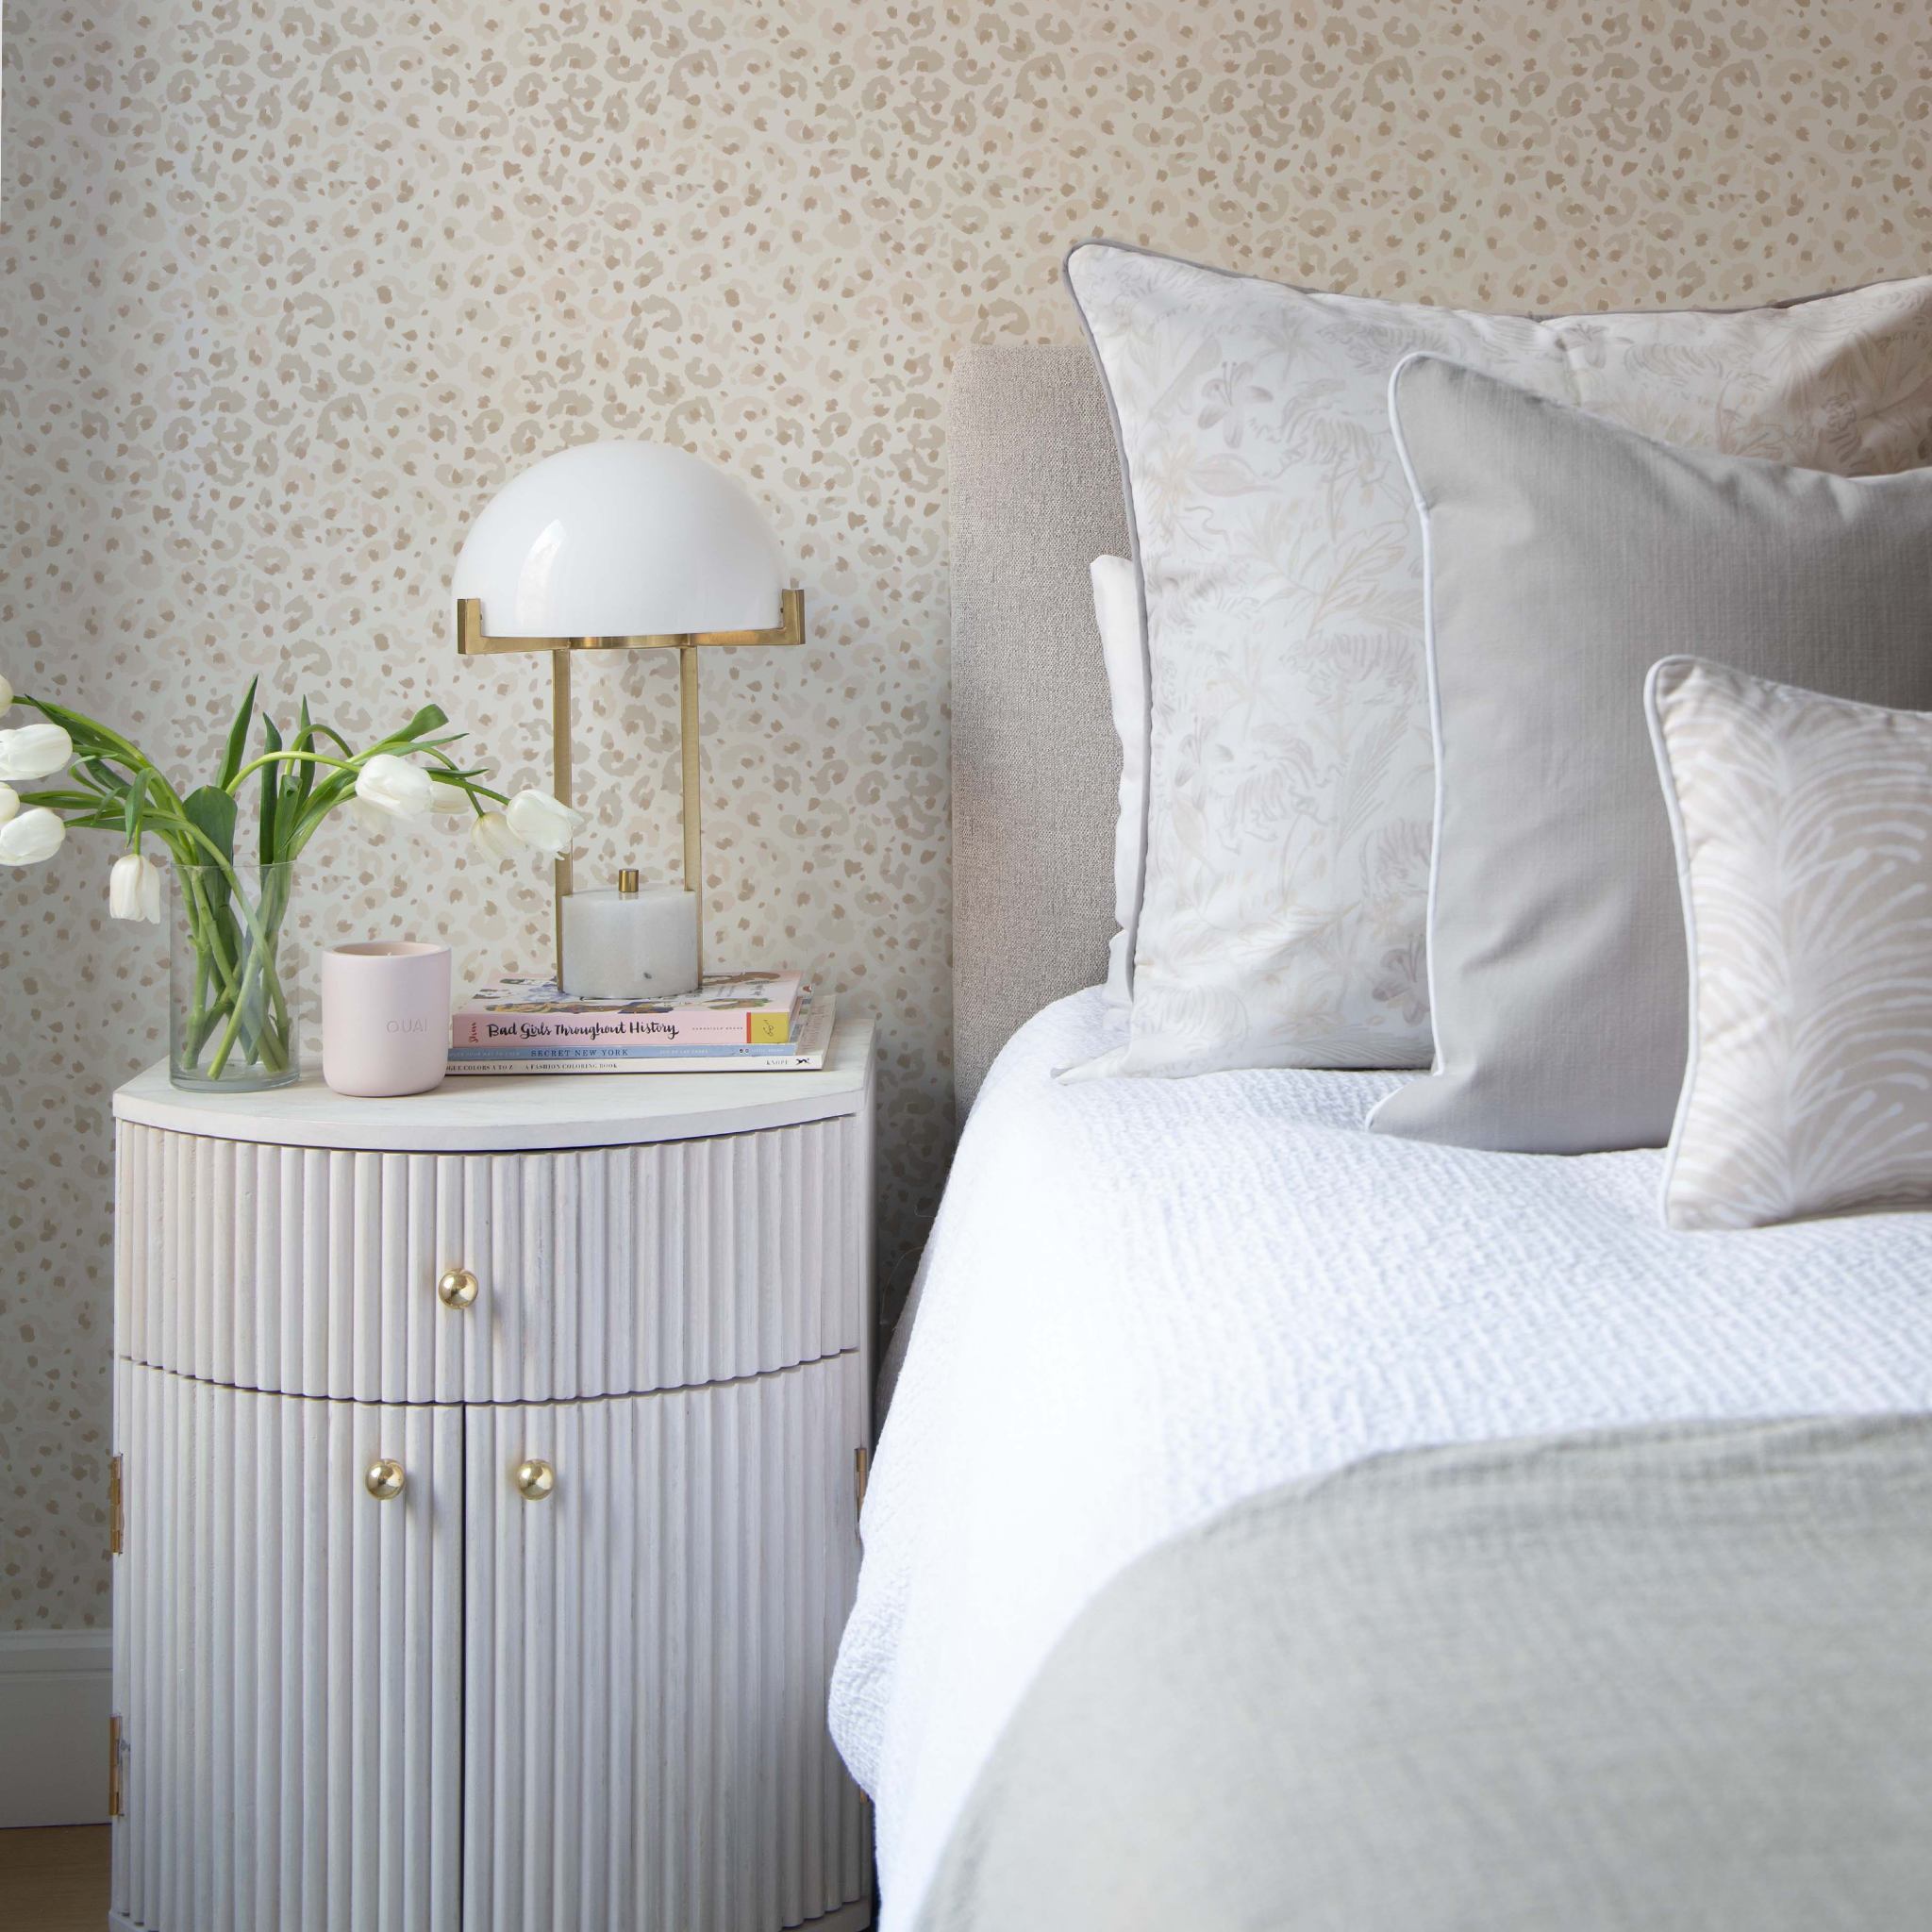 Bedroom corner styled with Beige Animal Print Wallpaper and Beige Chinoiserie Tiger Printed pillow, Linen Oat Pillow, and Beige Botanical Stripe Printed Lumbar next to white nightstand with white flowers and white lamp on top